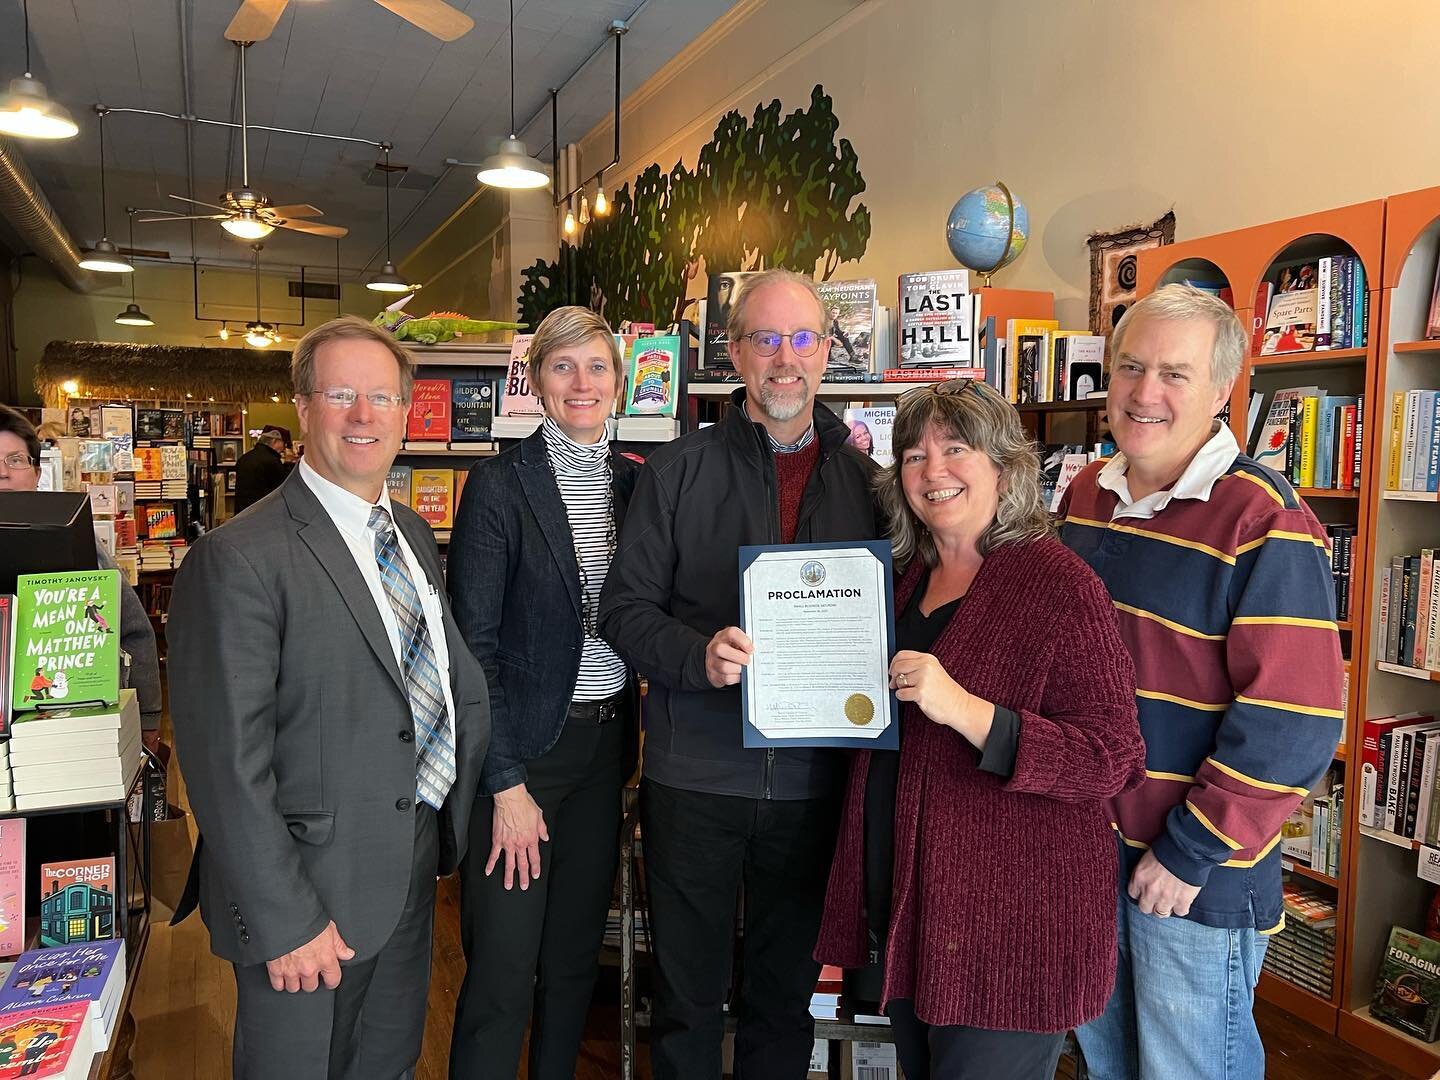 Today, three businesses &ndash; The Frederick Basket Company, Curious Iguana, and 4 The Love of Sweets represented our small business community in The City of Frederick's official proclamation of the upcoming &ldquo;Small Business Saturday.&rdquo;
Ce